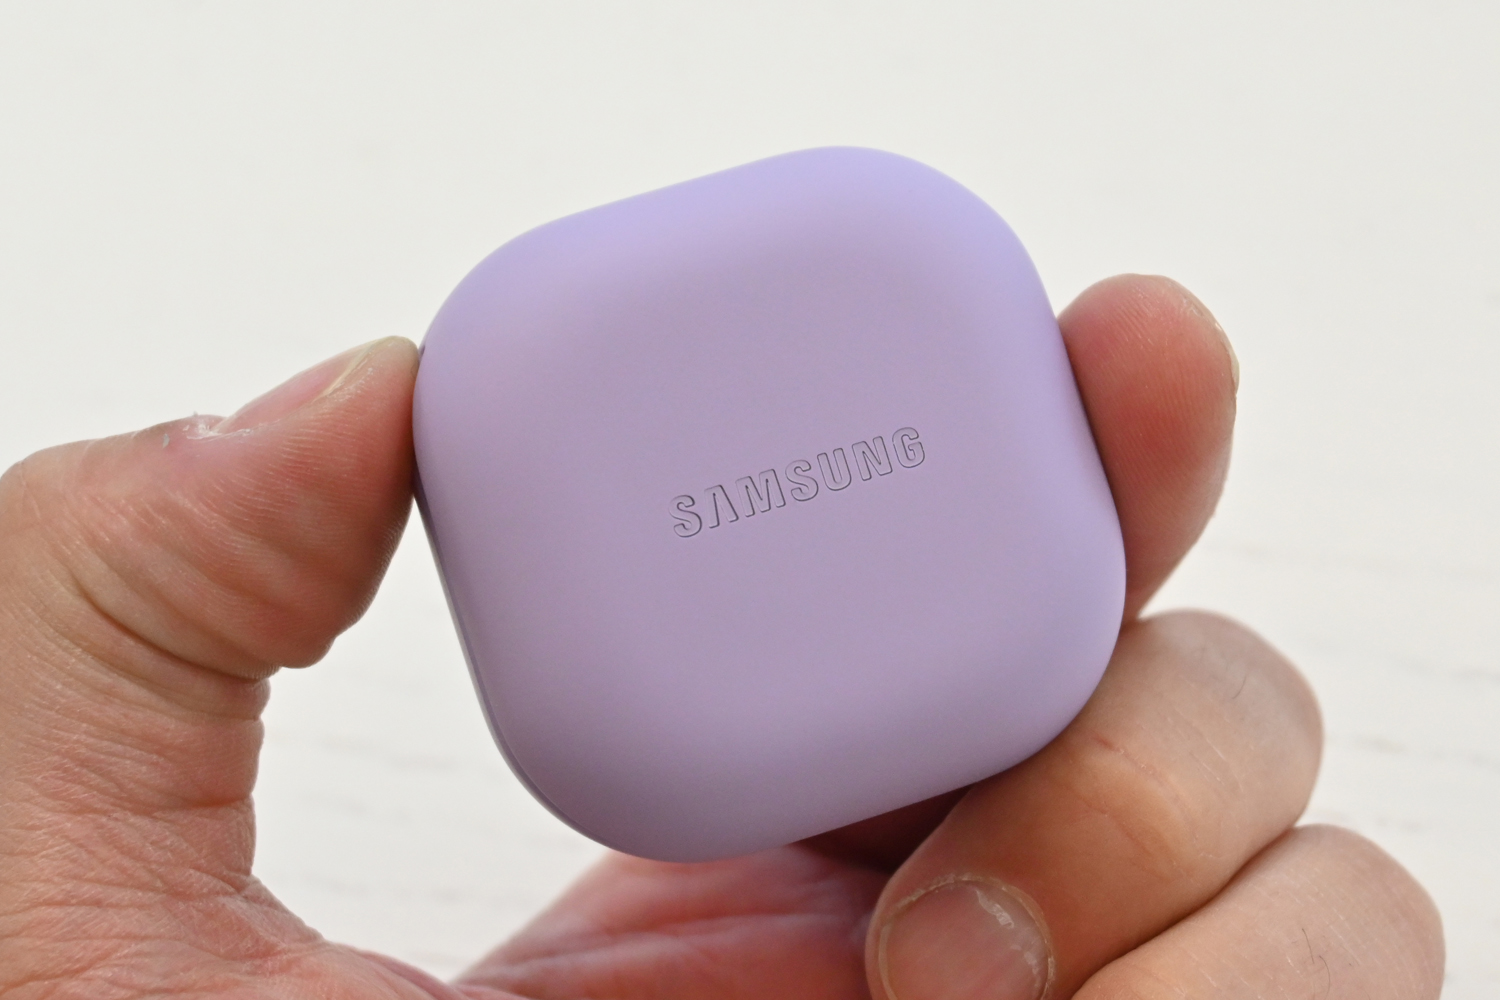 Samsung-Galaxy-Buds-Pro-2-hands-on-review-case-in-hand.jpg